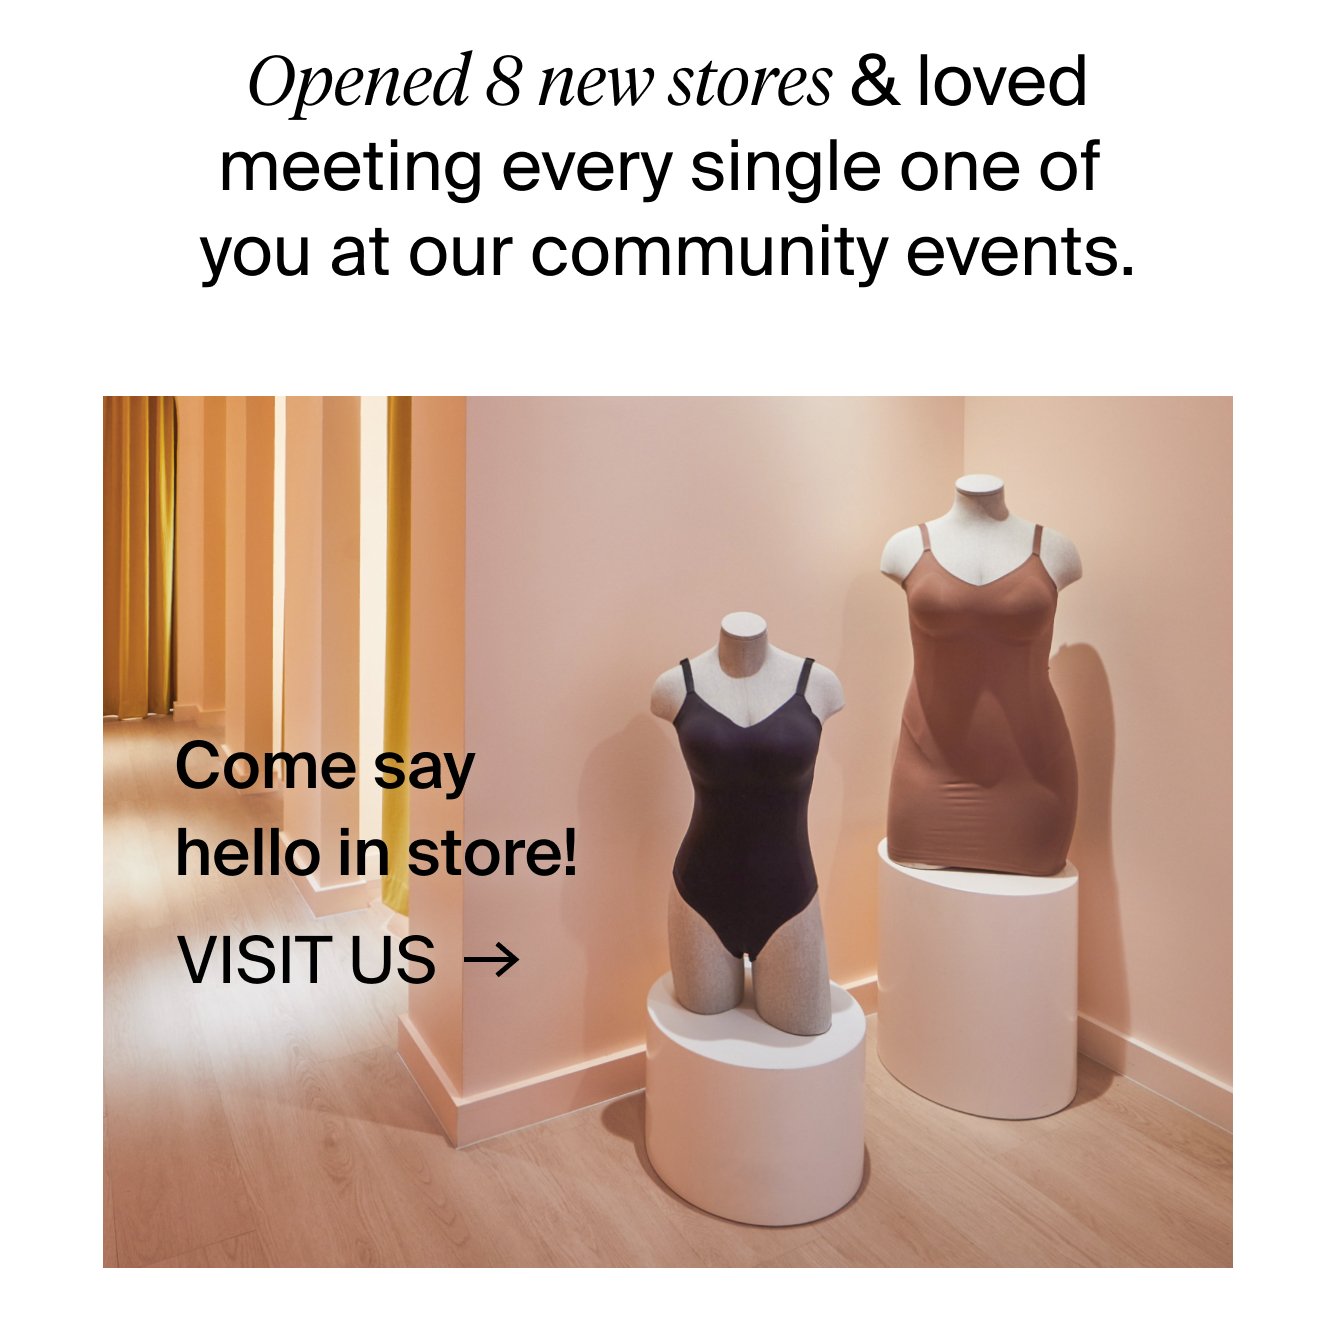 Opened 8 new stores & loved meeting every single one of you at our community events. Come say hello in store! VISIT US.